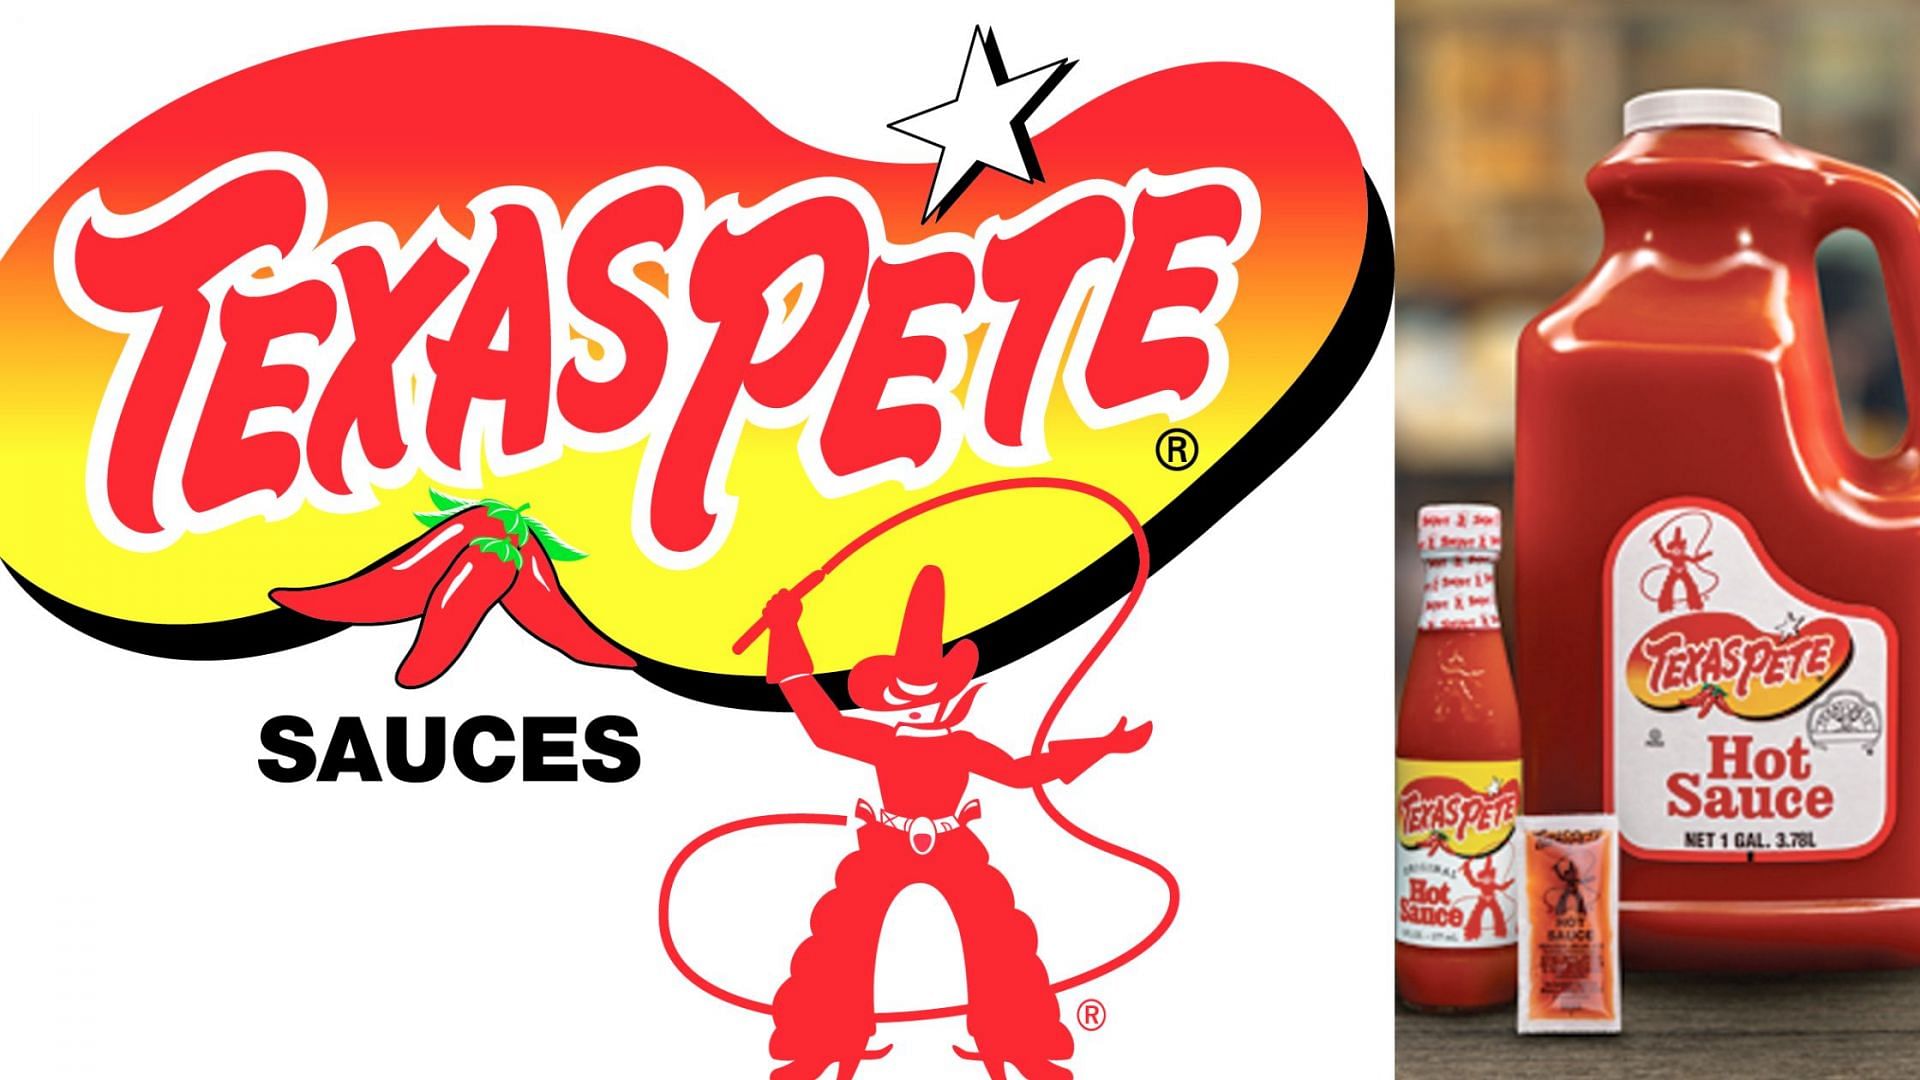 Hot sauce brand Texas Pete is being sued for false-advertising (image via Getty Images)